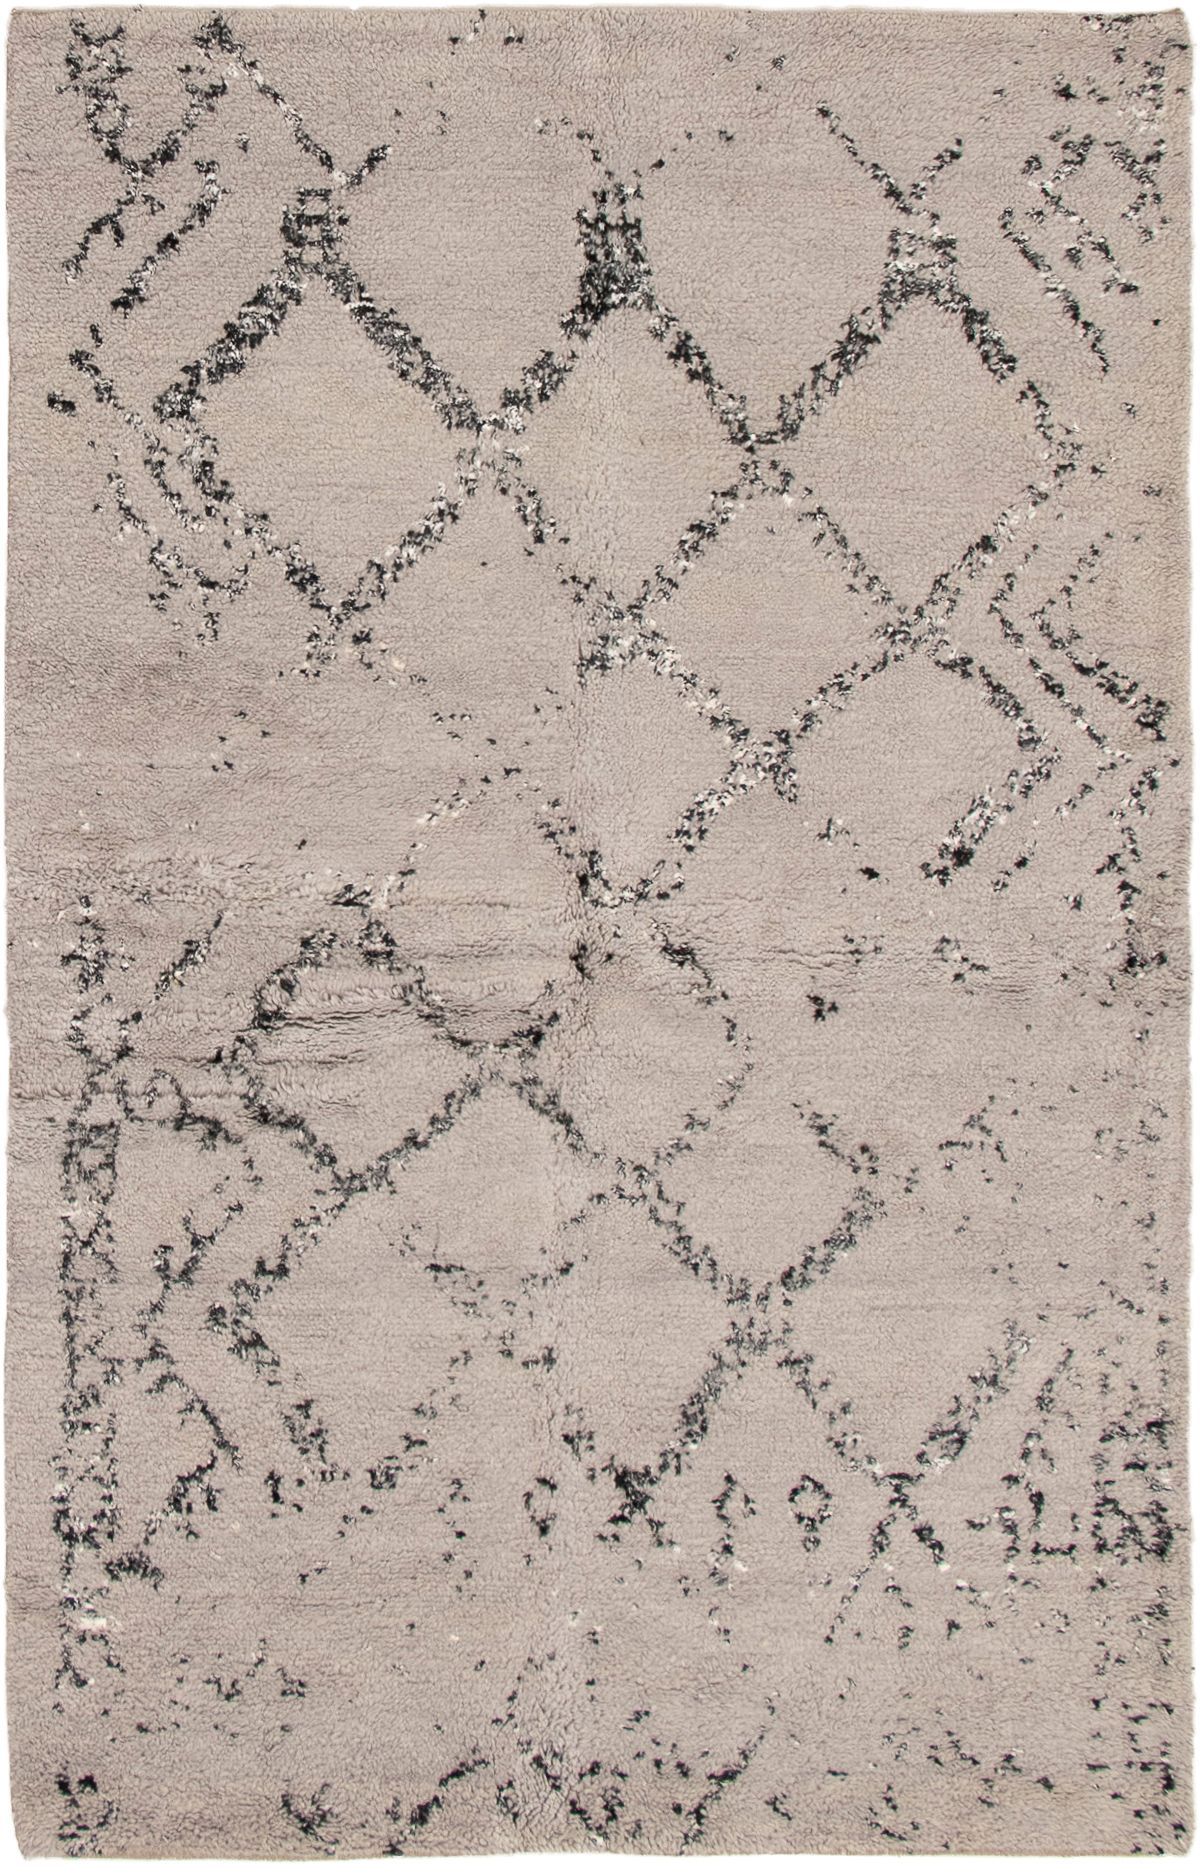 Hand-knotted Arlequin Light Grey Wool Rug 5'3" x 8'2" Size: 5'3" x 8'2"  